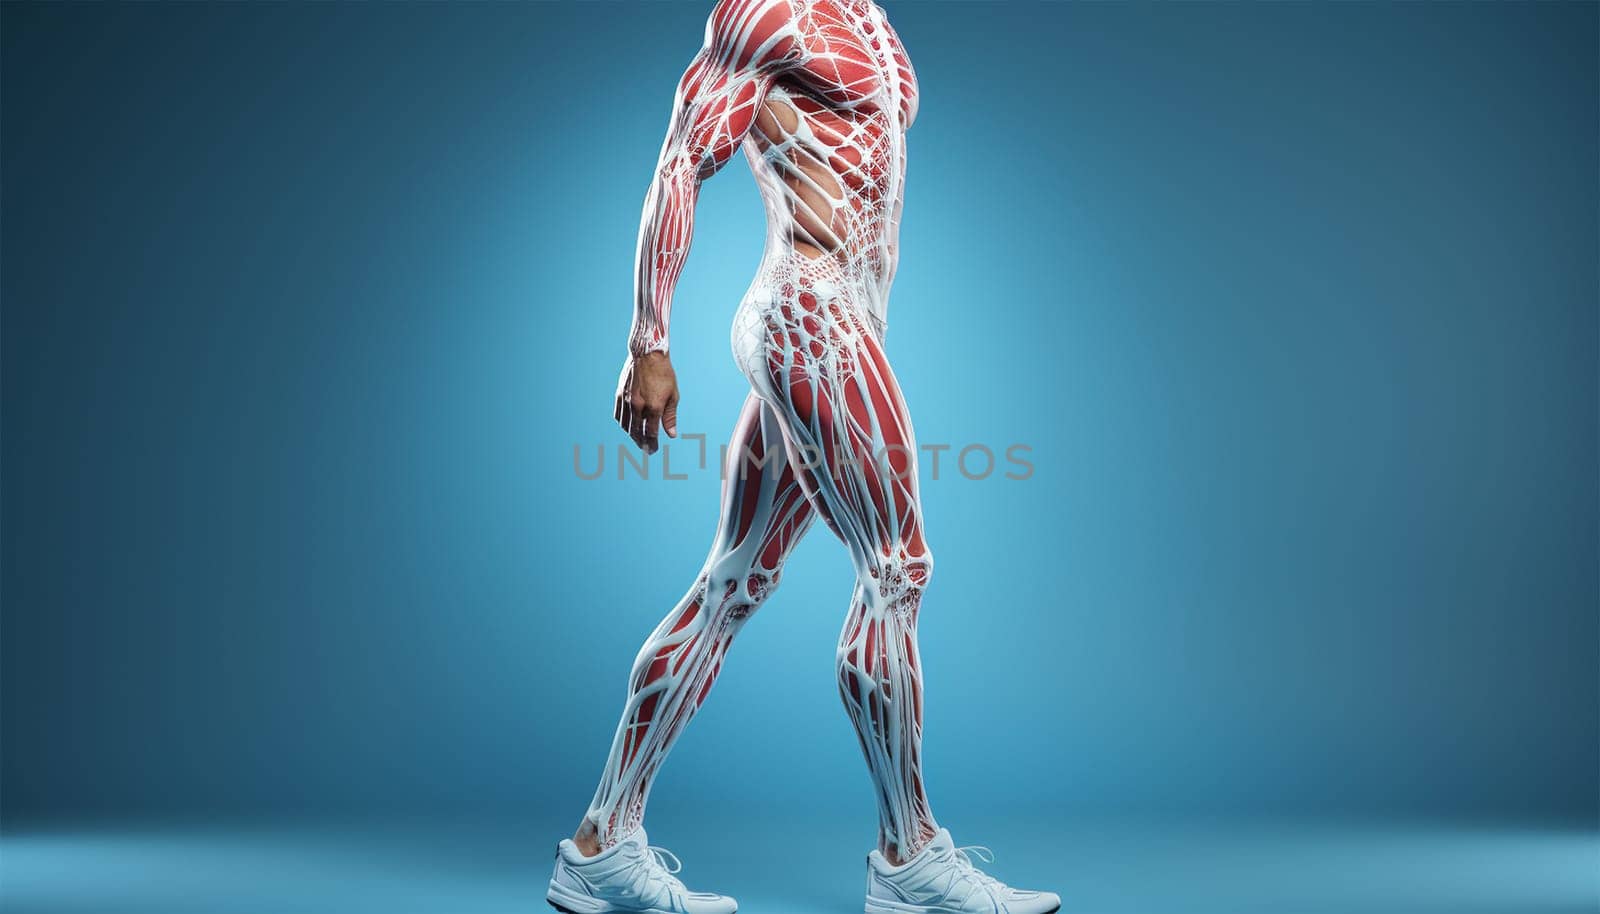 Anatomical Human head and shoulders. Demonstrating the muscles and ligaments of a human being. Image is on blue background. Mannequin anatomy internal organs, x ray,model for medical healthcare 3D by Annebel146